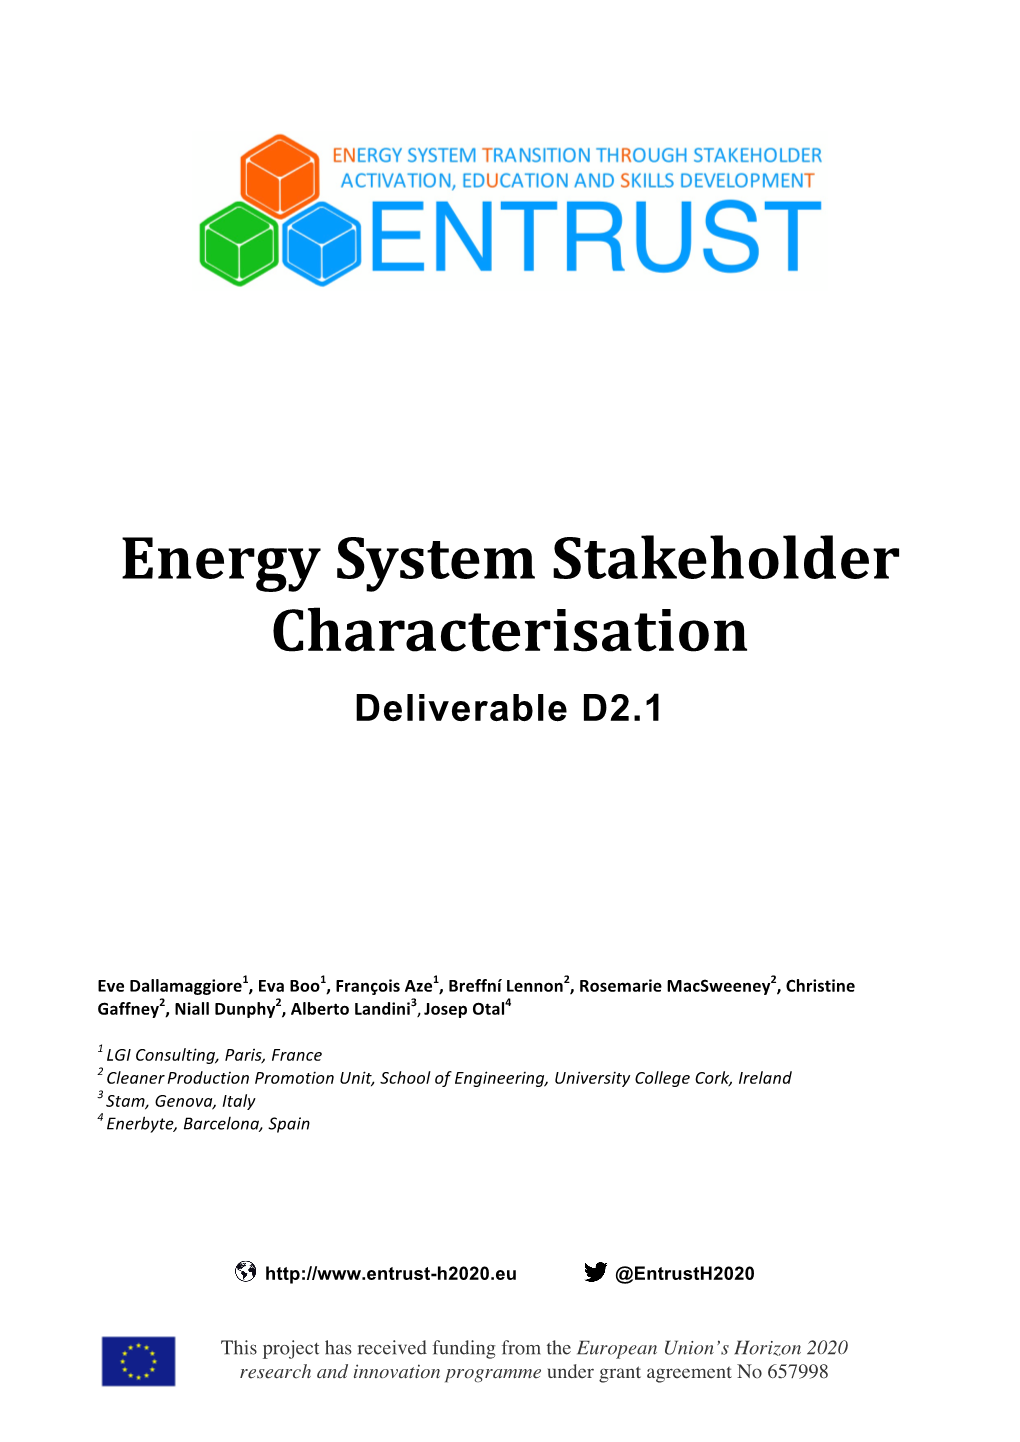 D2.1 Energy System Stakeholder Characterisation